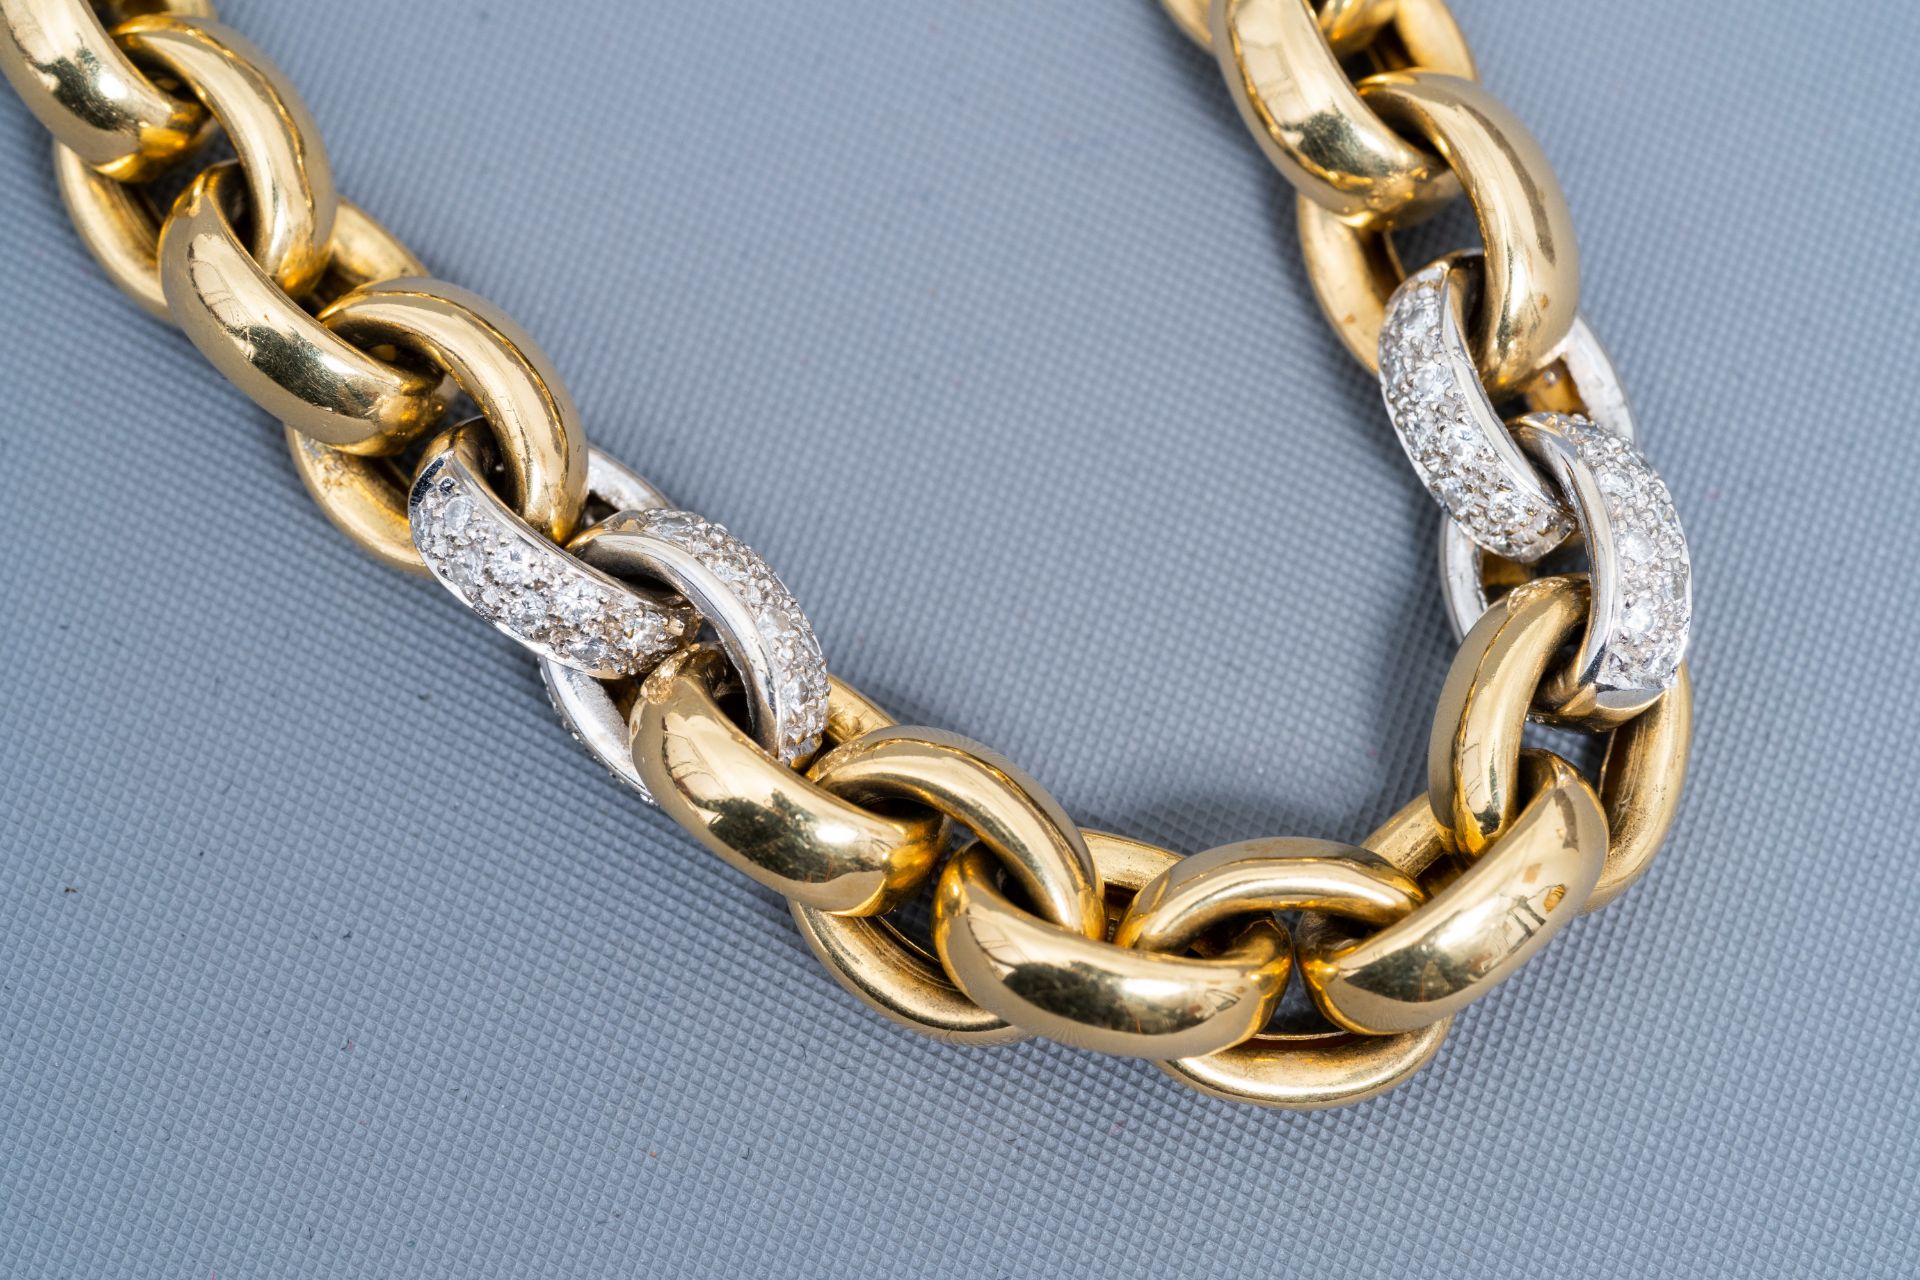 An 18 carat yellow and white gold bracelet set with 108 diamonds, 20th C. - Image 5 of 5